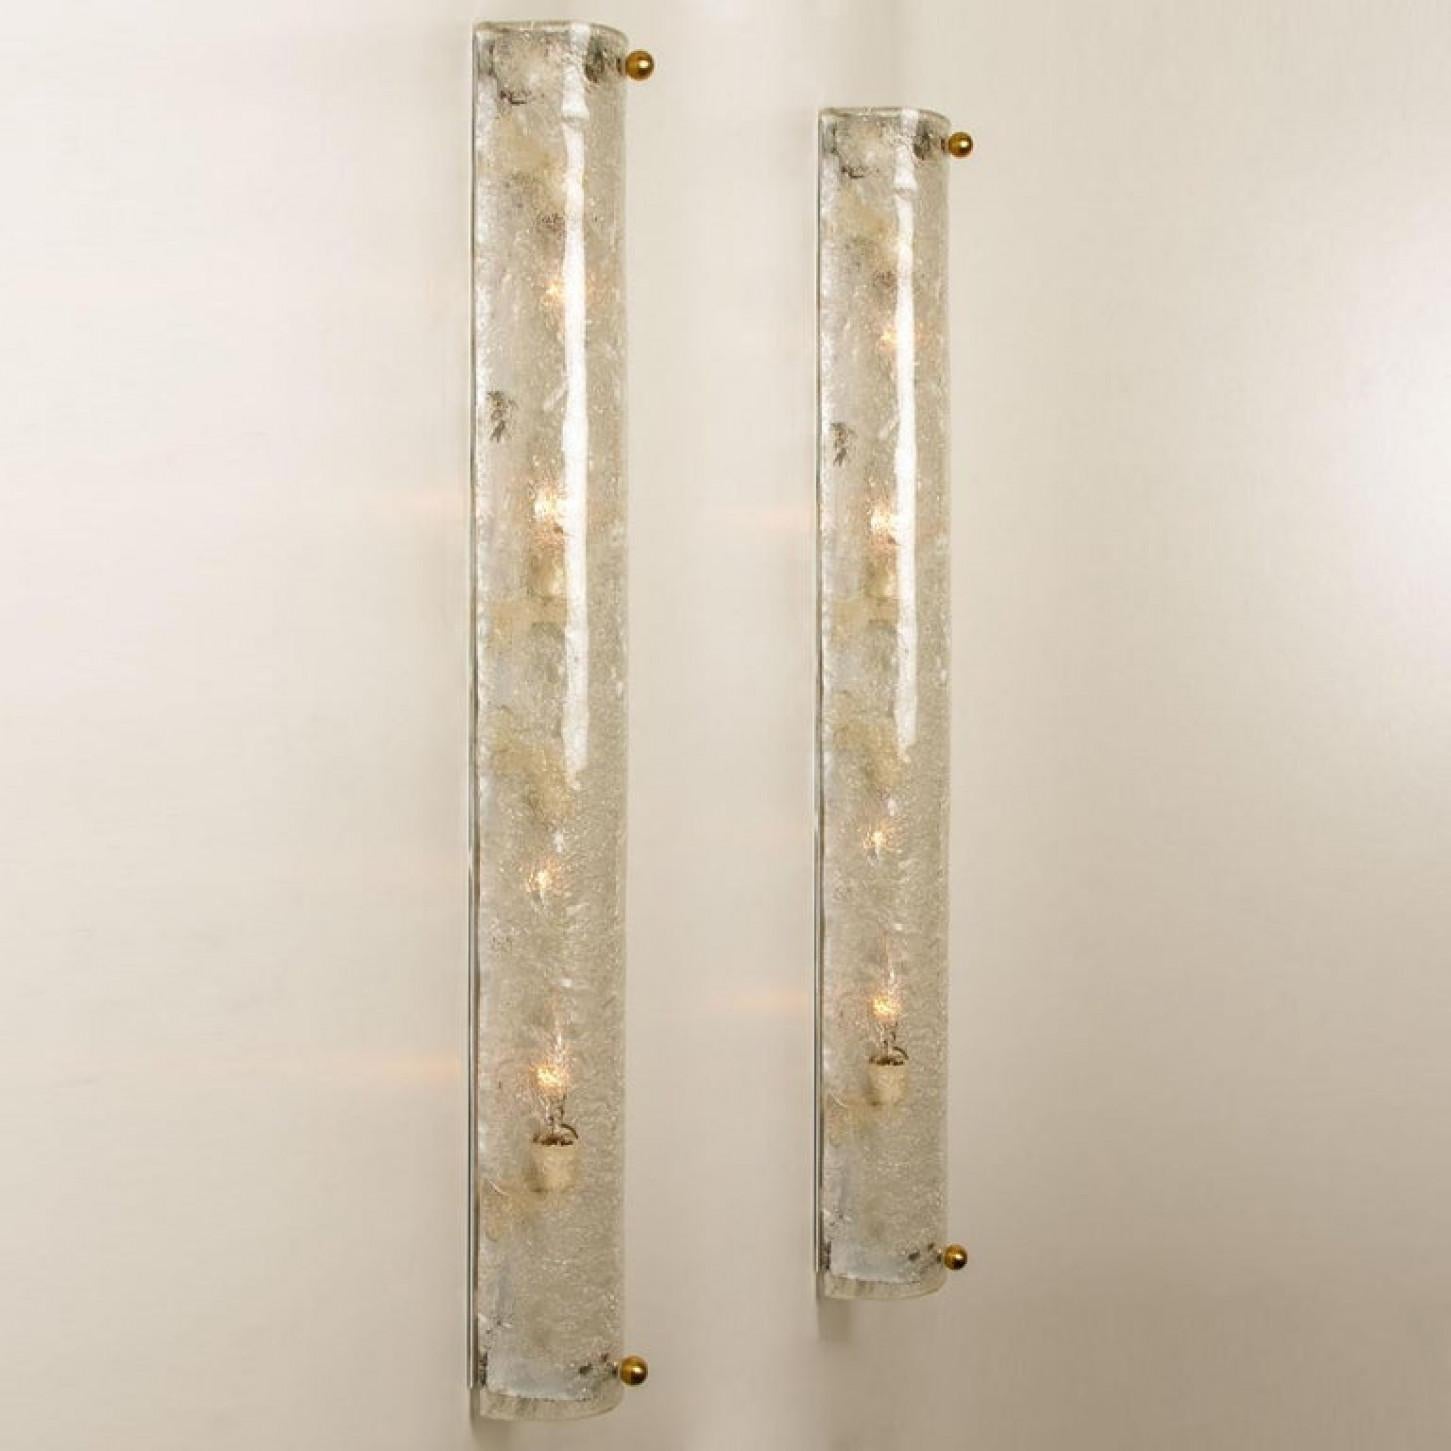 Pair of large high-end Murano glass on a white base sconces by Hillebrand, Germany, circa 1960s.
It consists of textured quality clear crystal tubular shade simulating ice on white frame and brass screws.

The design allows this light to be placed